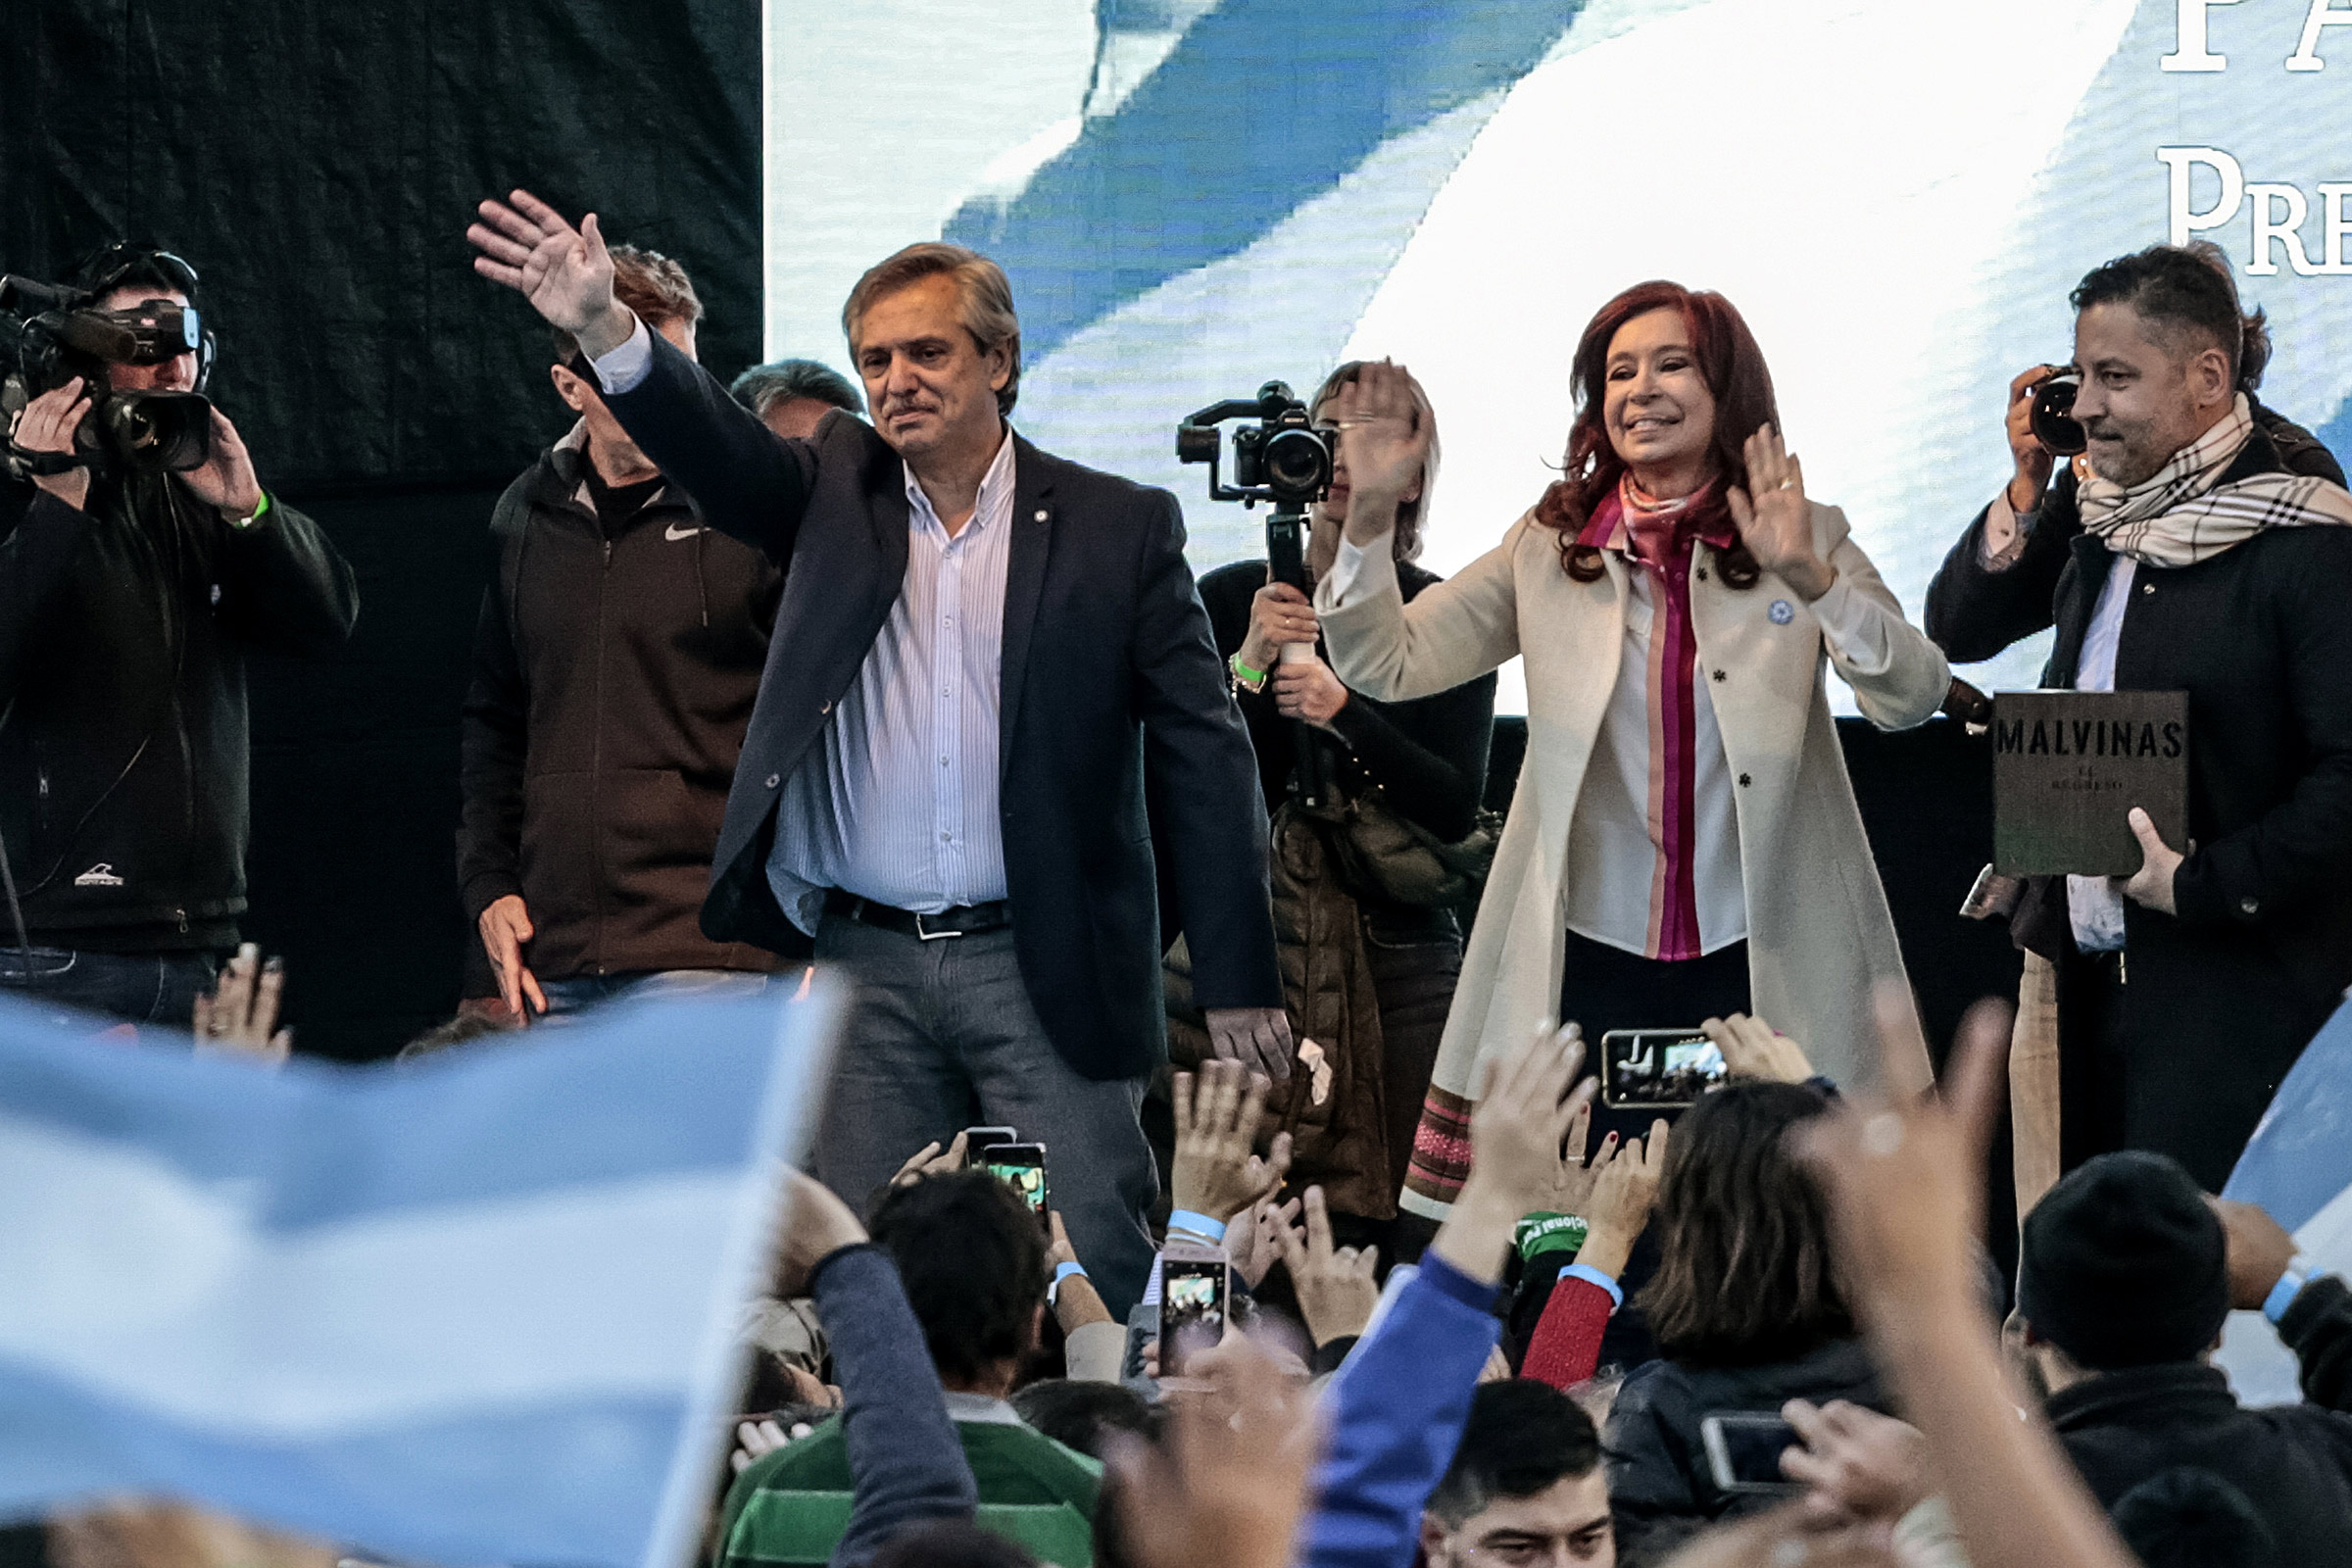 Presidential candidate Alberto Fernandez and former president of Argentina Cristina Fernandez de Kirchner wave to attendees during their first campaign event in Merlo, Argentina, on May 25. (Sarah Pabst—Bloomberg/Getty Images)